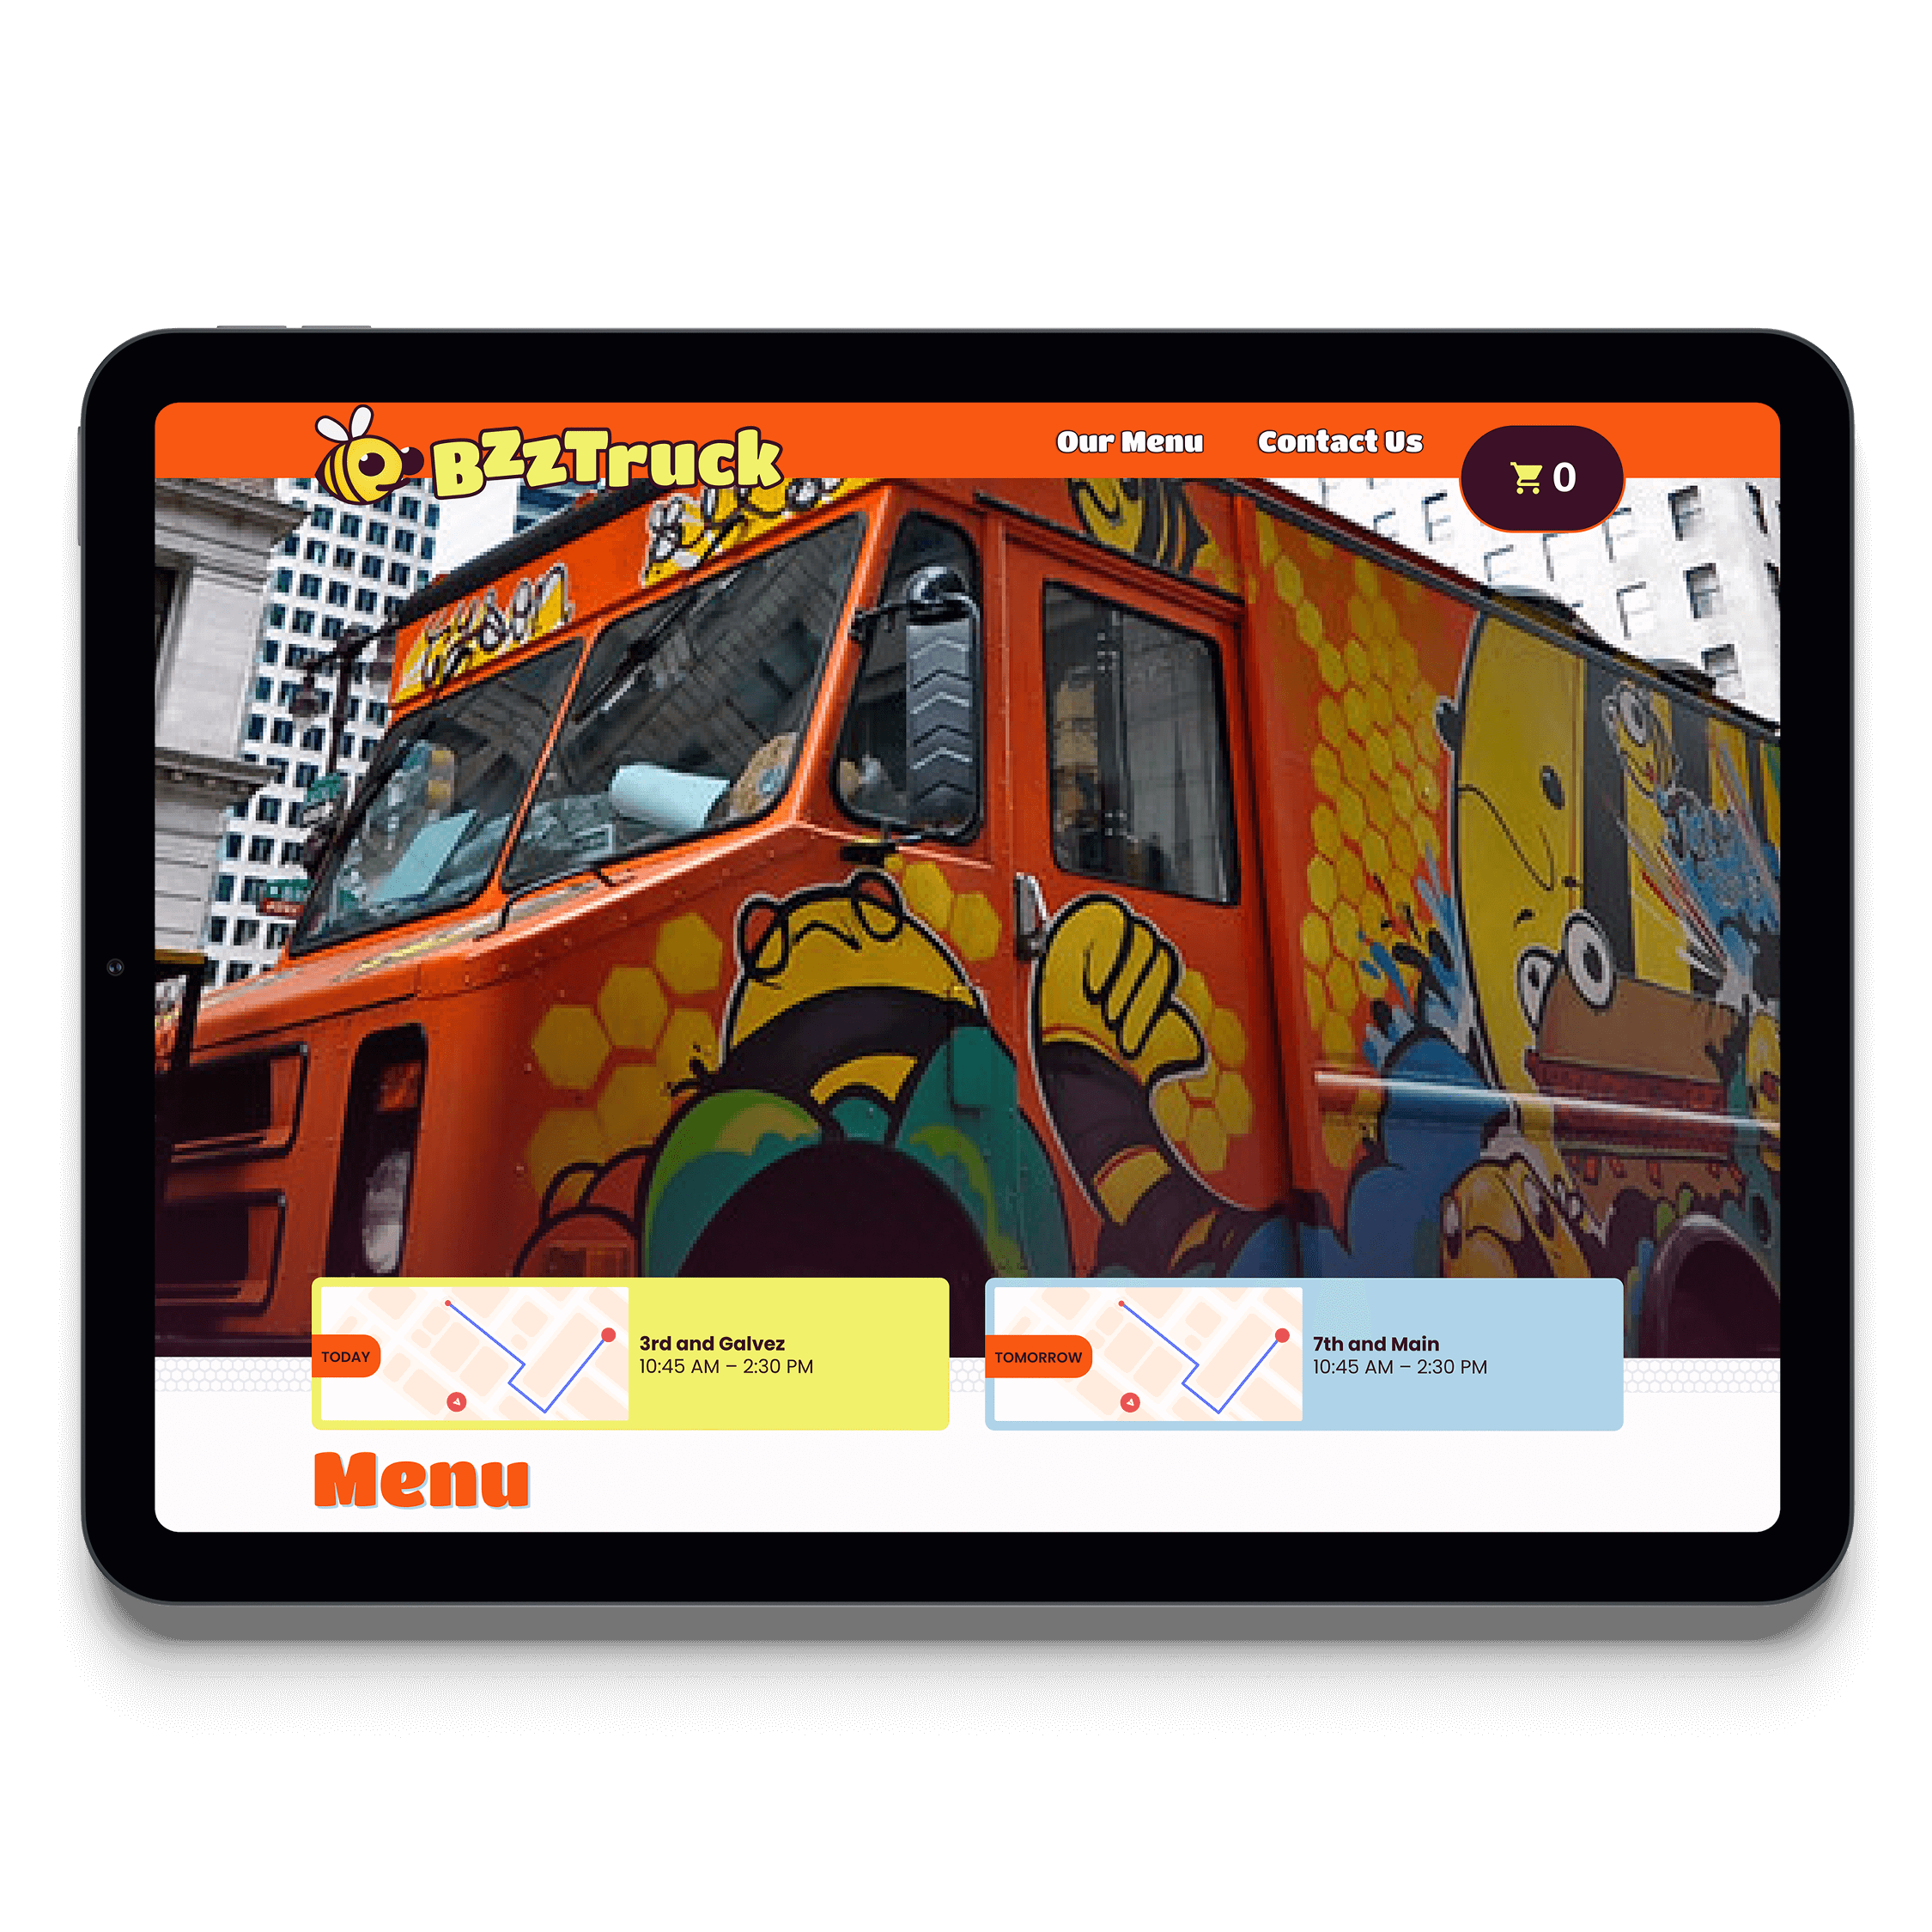 iPad showing the screen with the items in the food truck menu.